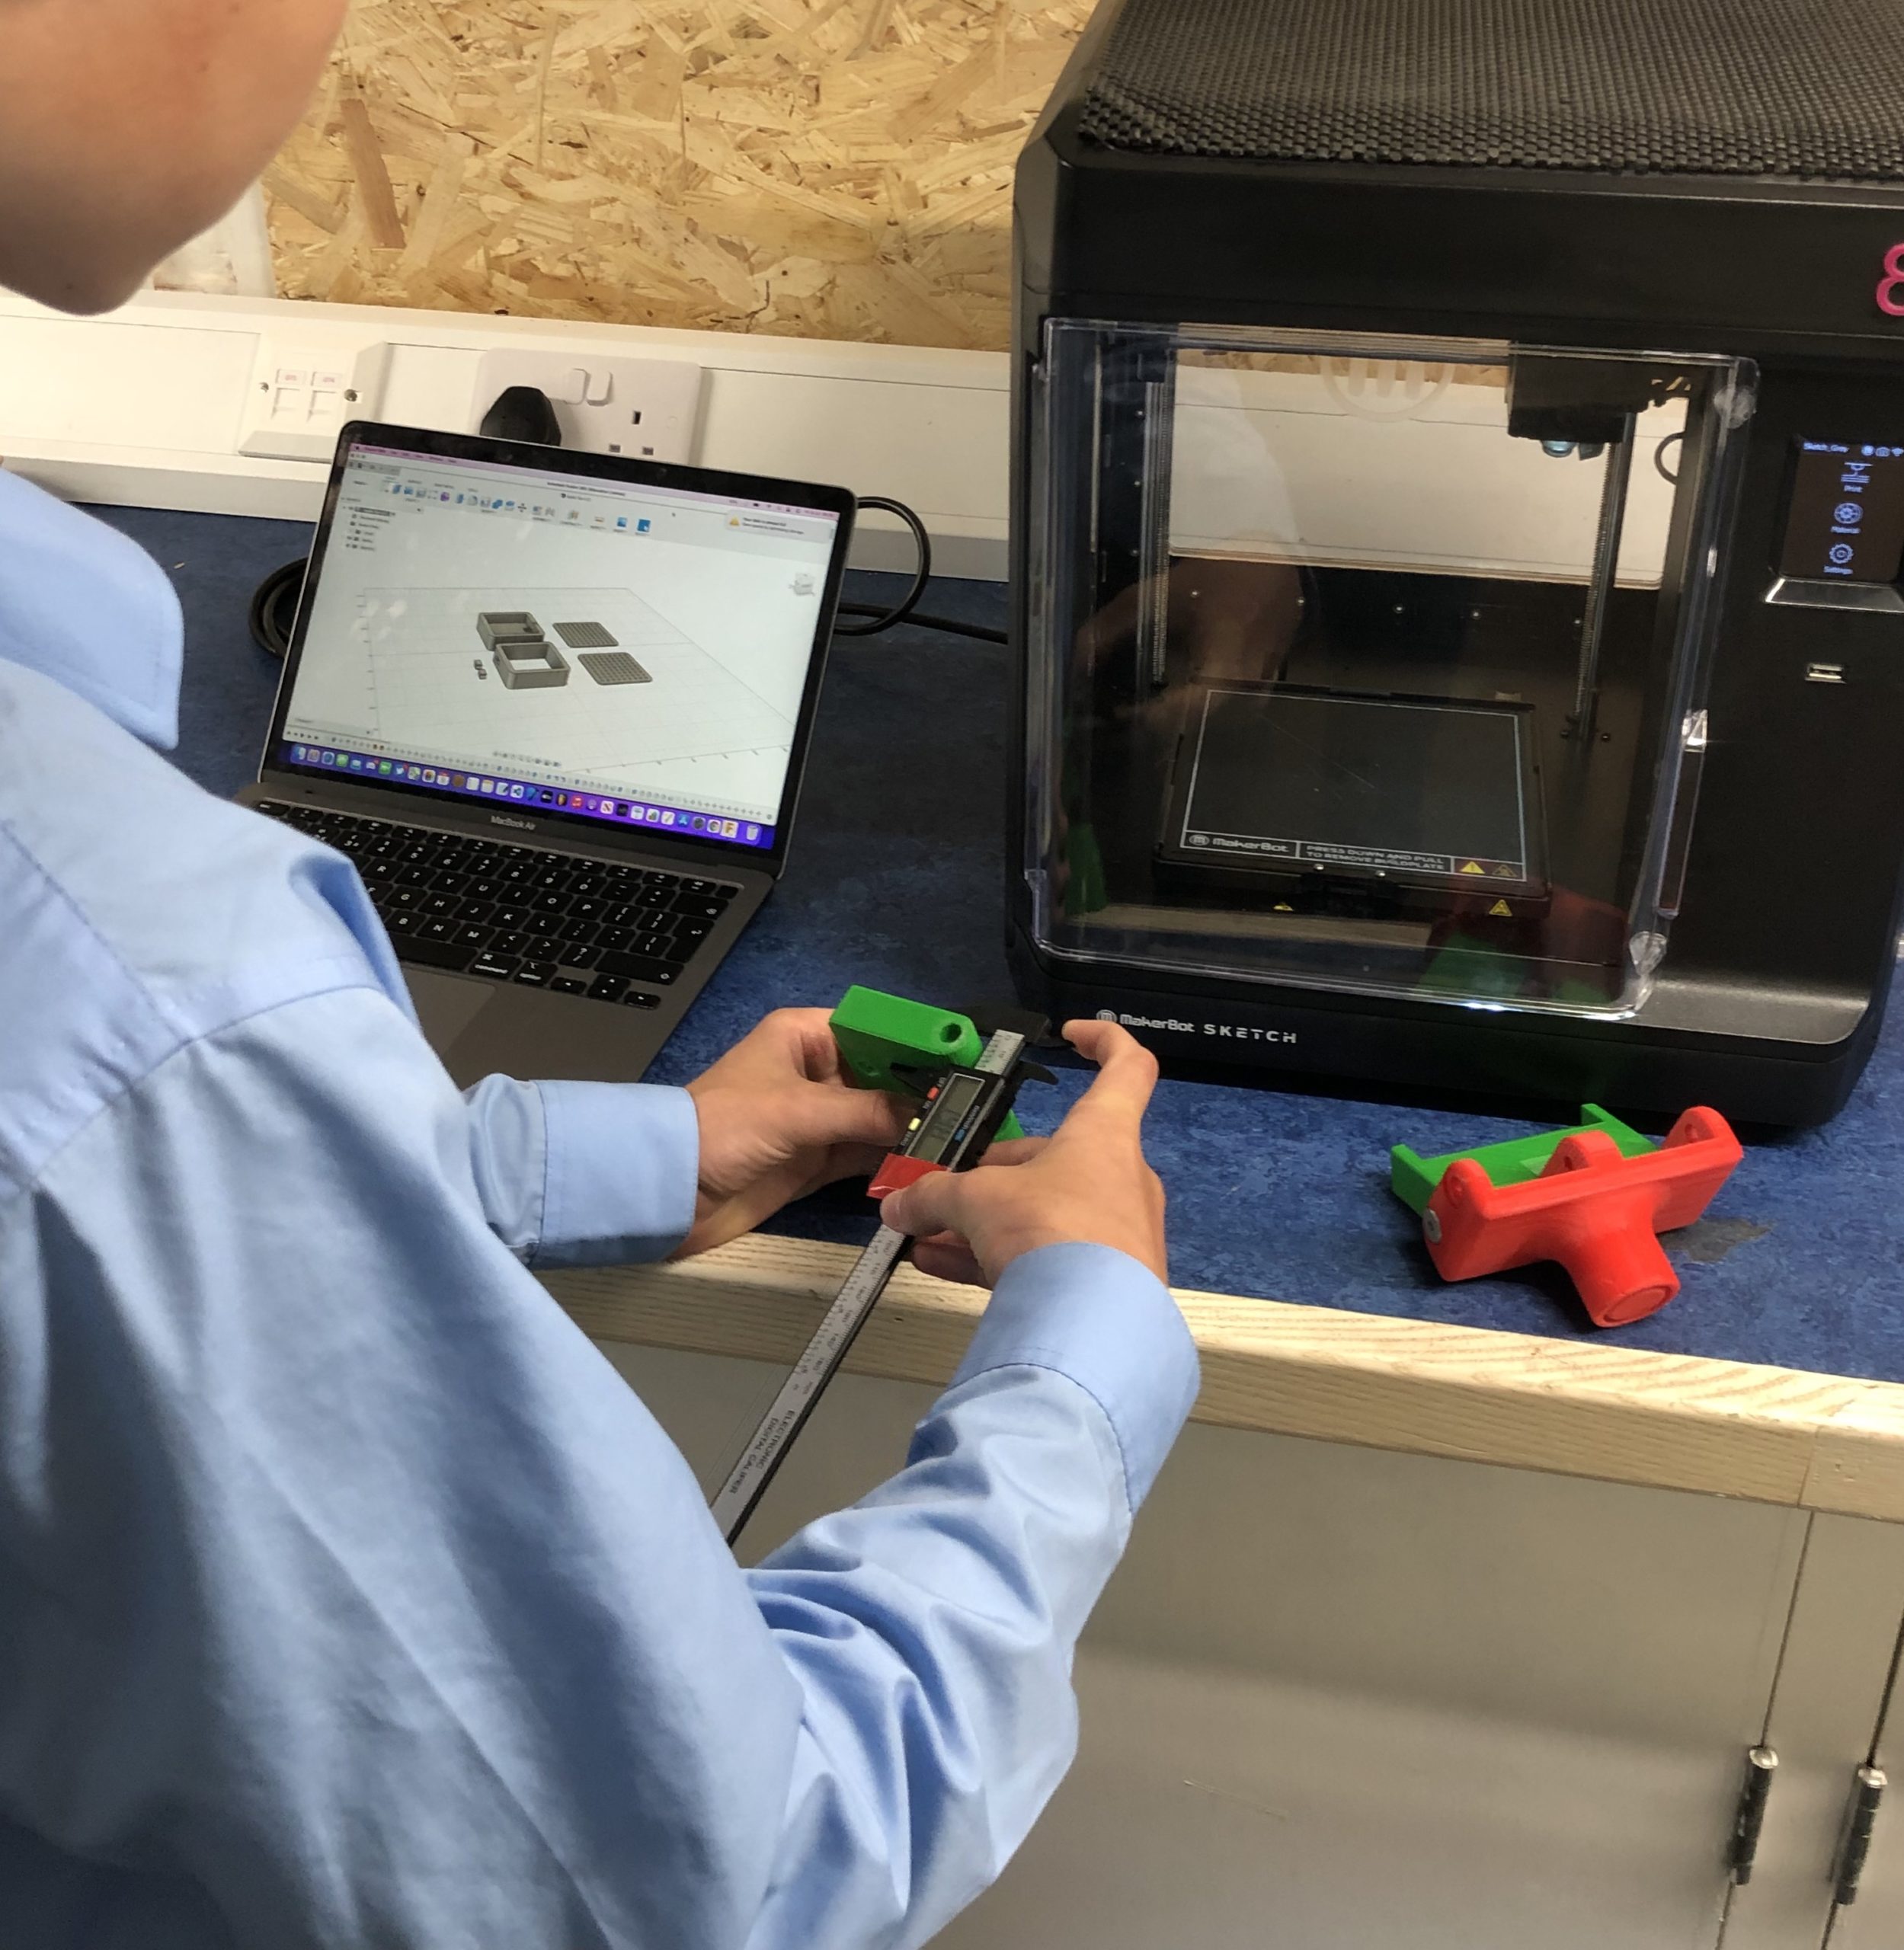 3D printing allows students to seamlessly print, test, and iterate on their designs